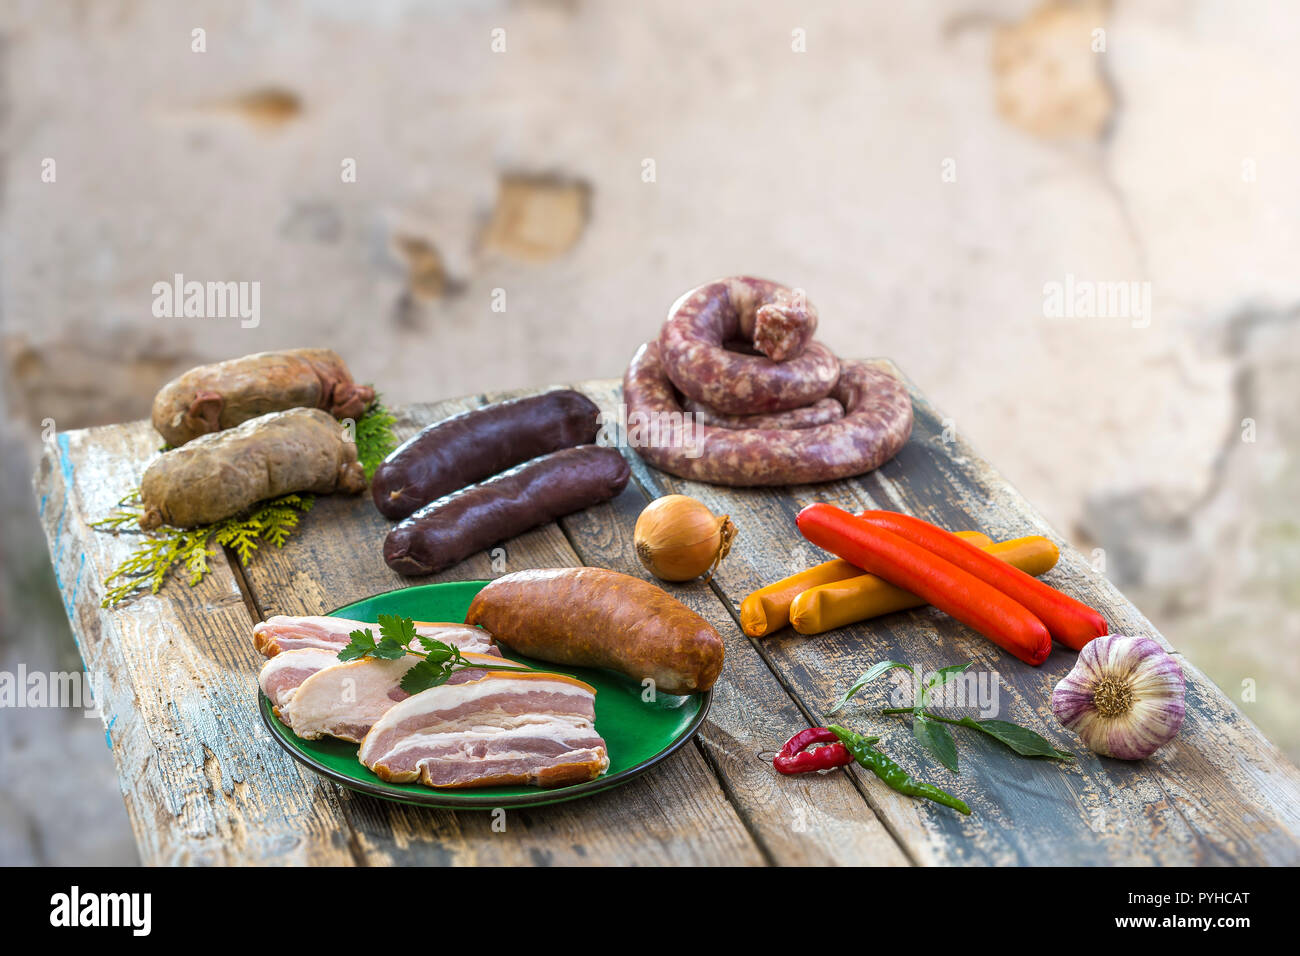 Selection of French Raw sausage with arugula leaves in a wooden board,vegetable on the table on old white cracked wall background. Stock Photo